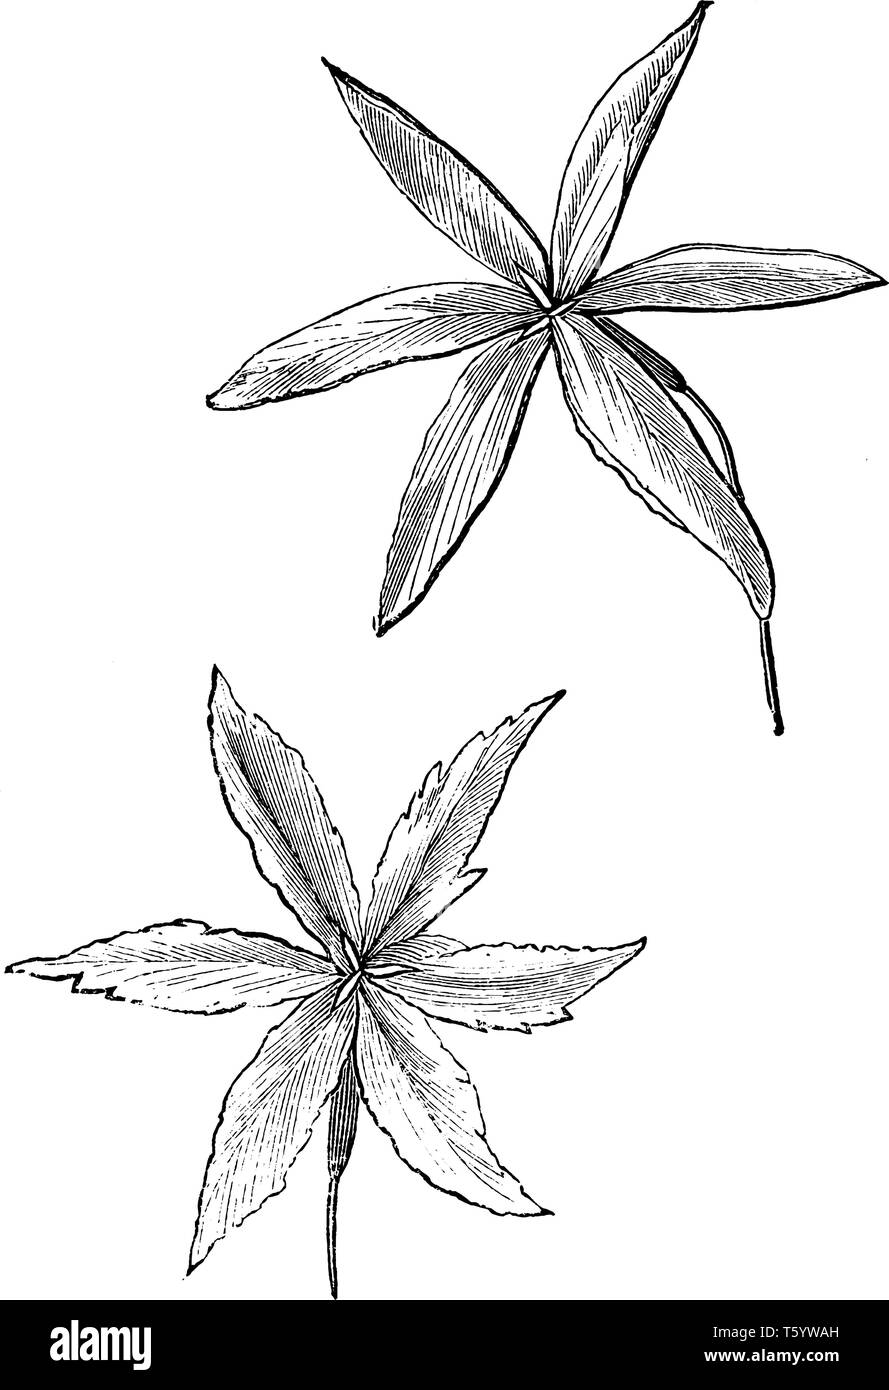 This is an image of Leucocoryne Ixiodes plant. There are two different flower head, one is entire segments and second is toothed segments, vintage lin Stock Vector